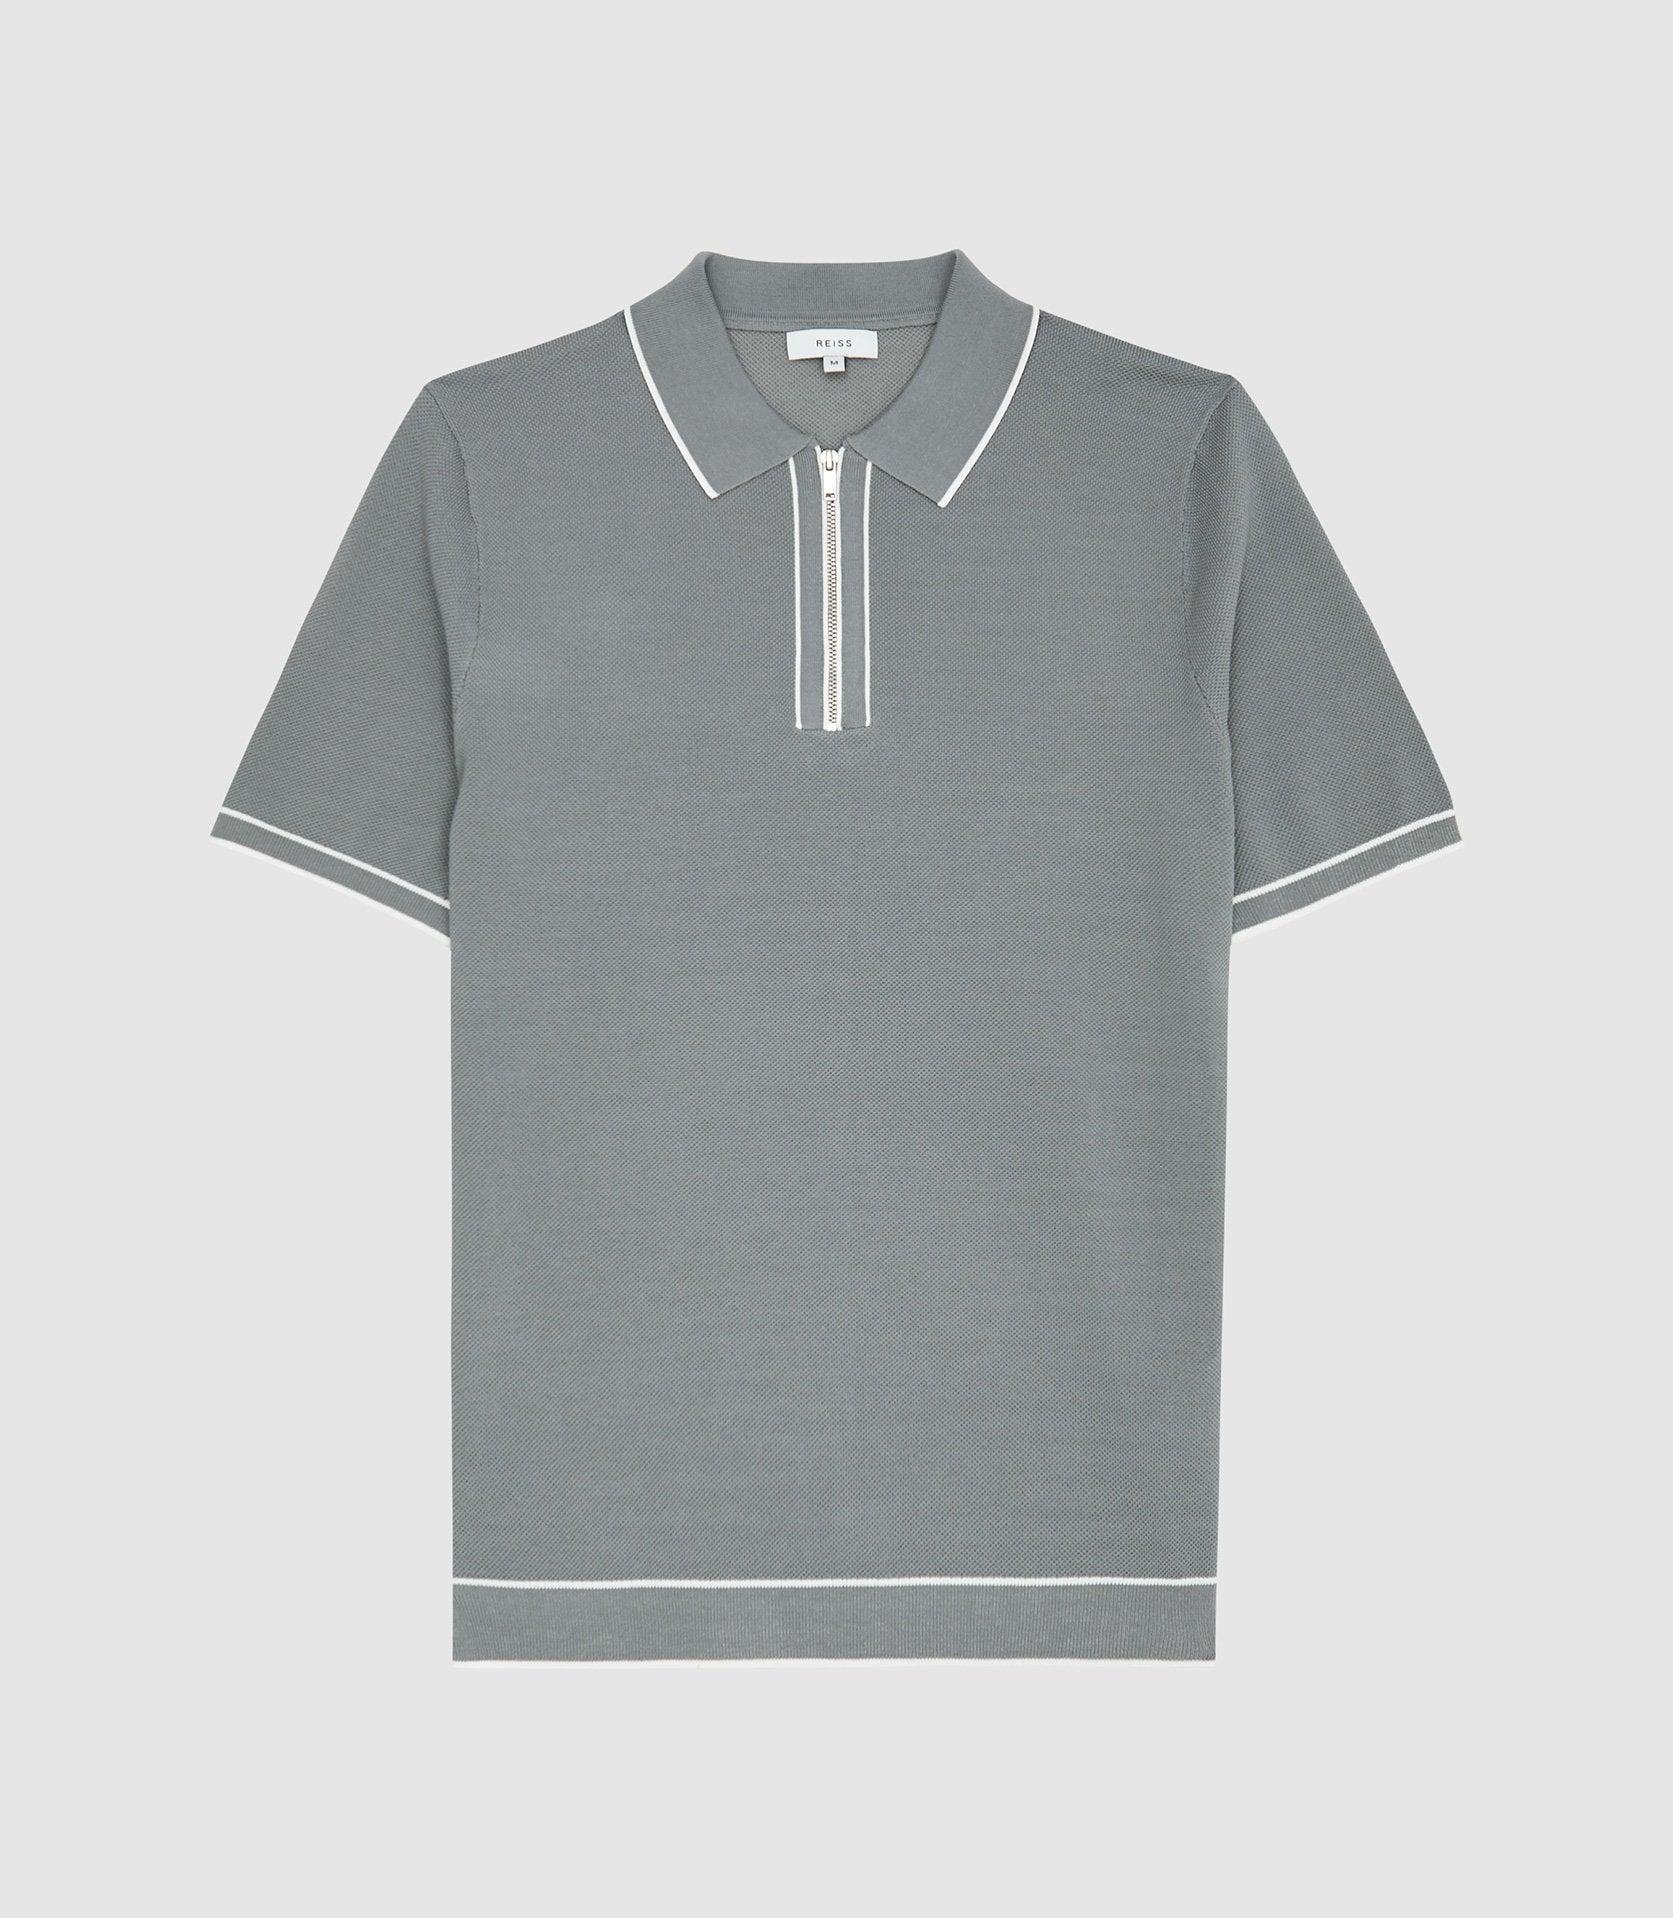 Reiss Tipped Zip Neck Polo in Gray for Men - Lyst